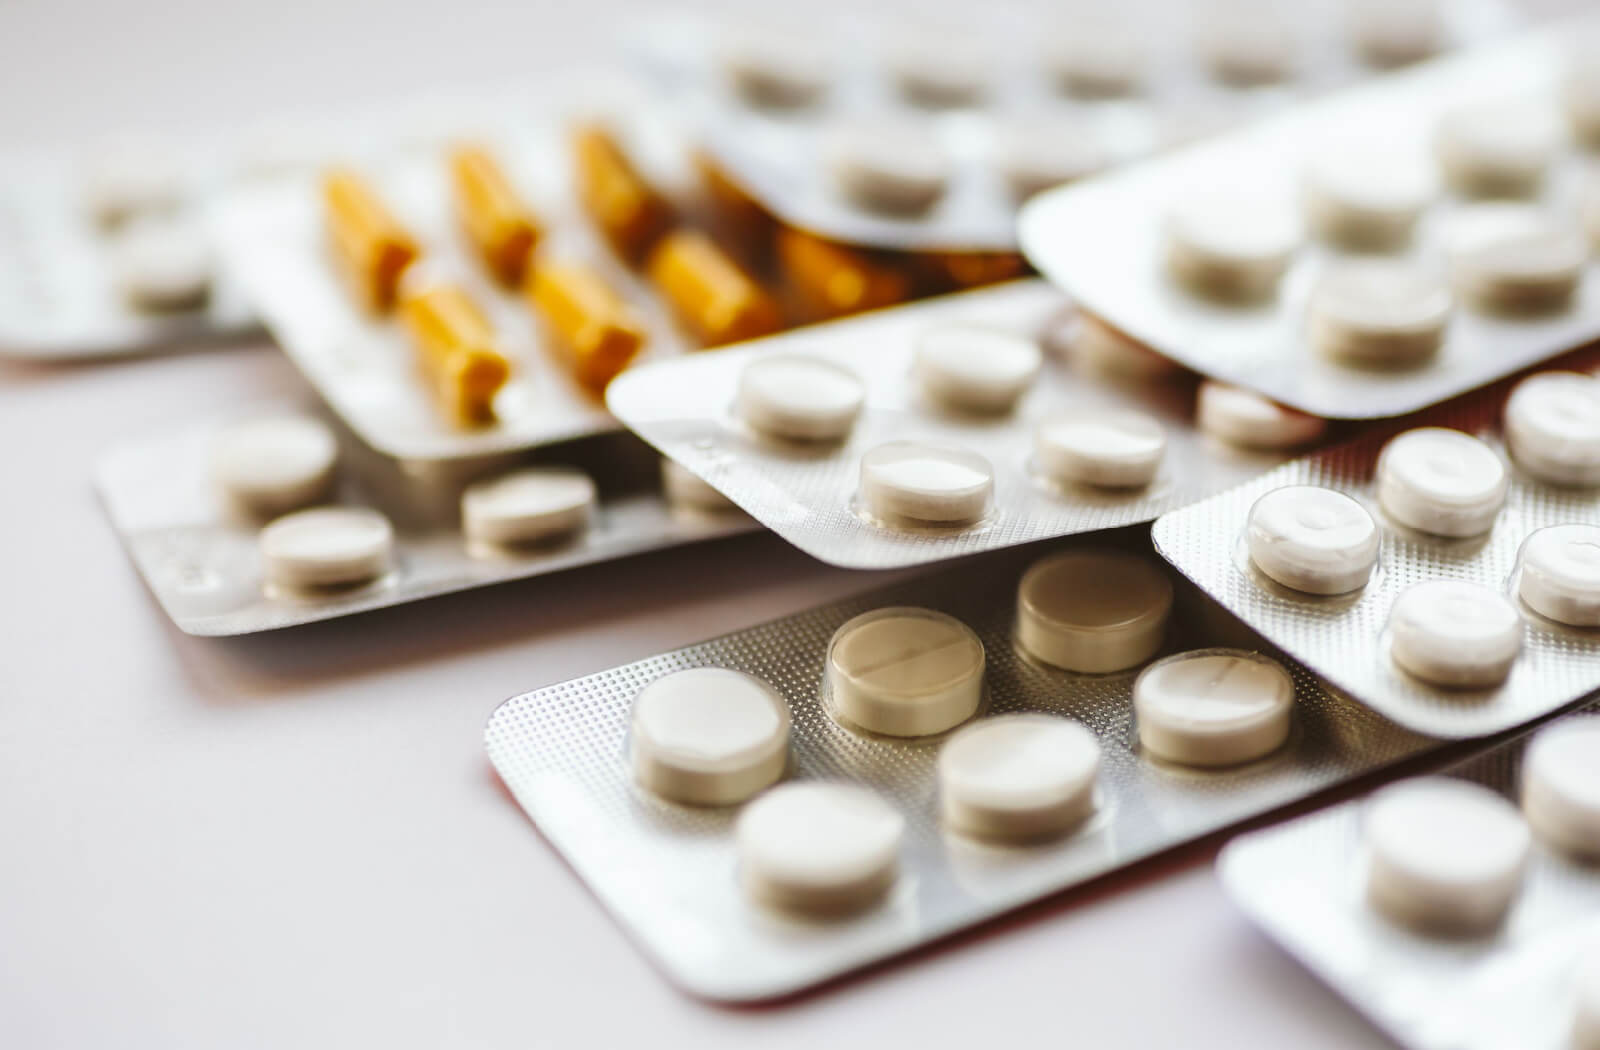 An assortment of medications on a white surface.
